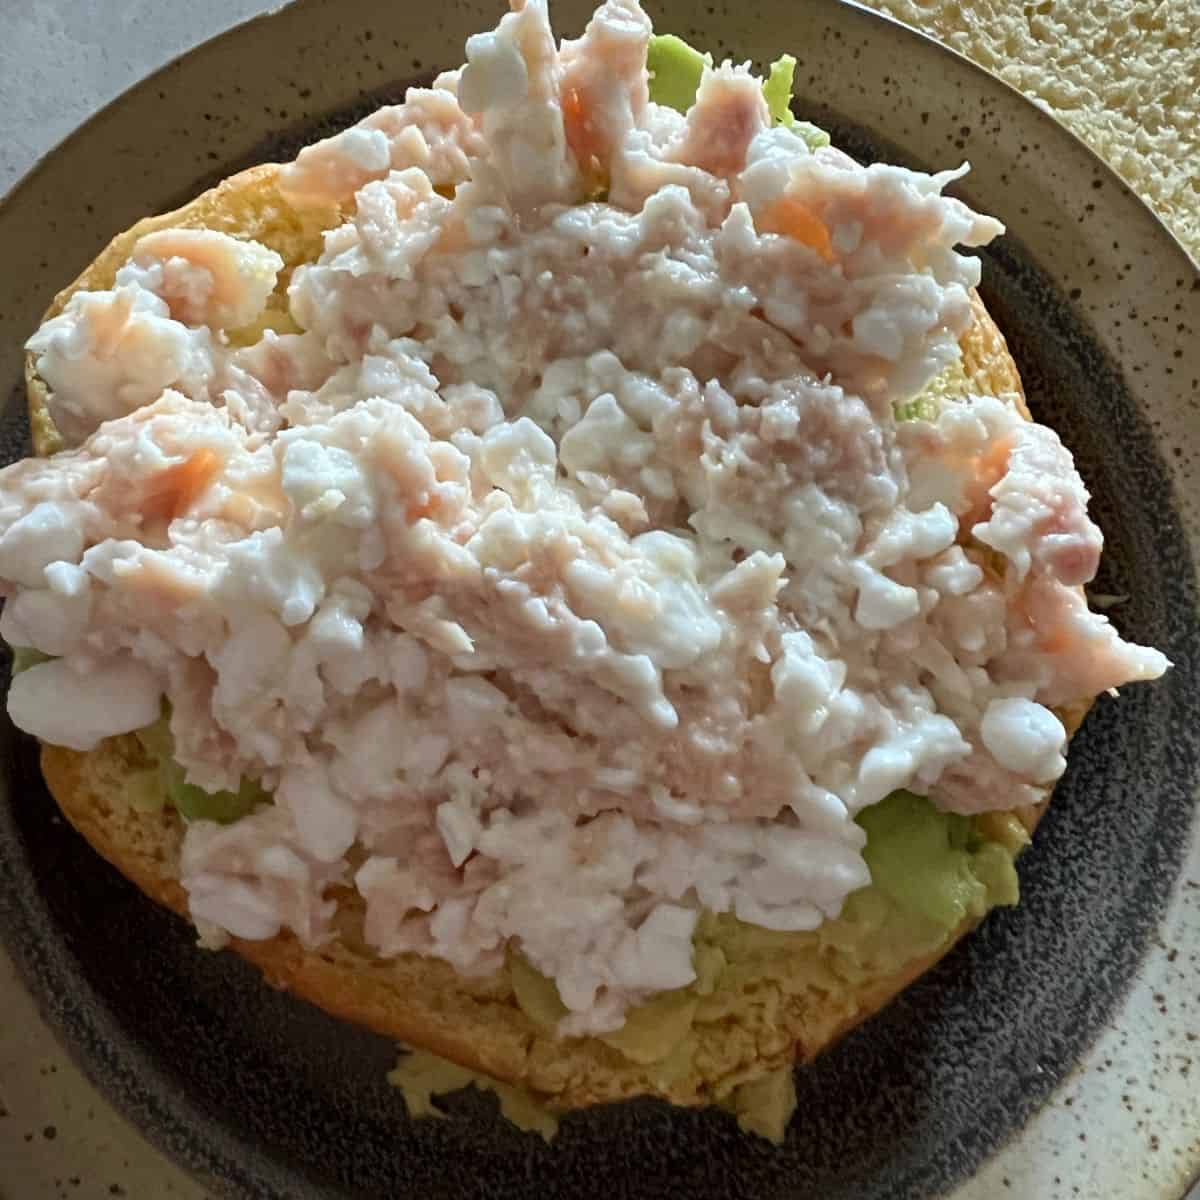 Tuna and cottage cheese on a bun with mashed avocado. 